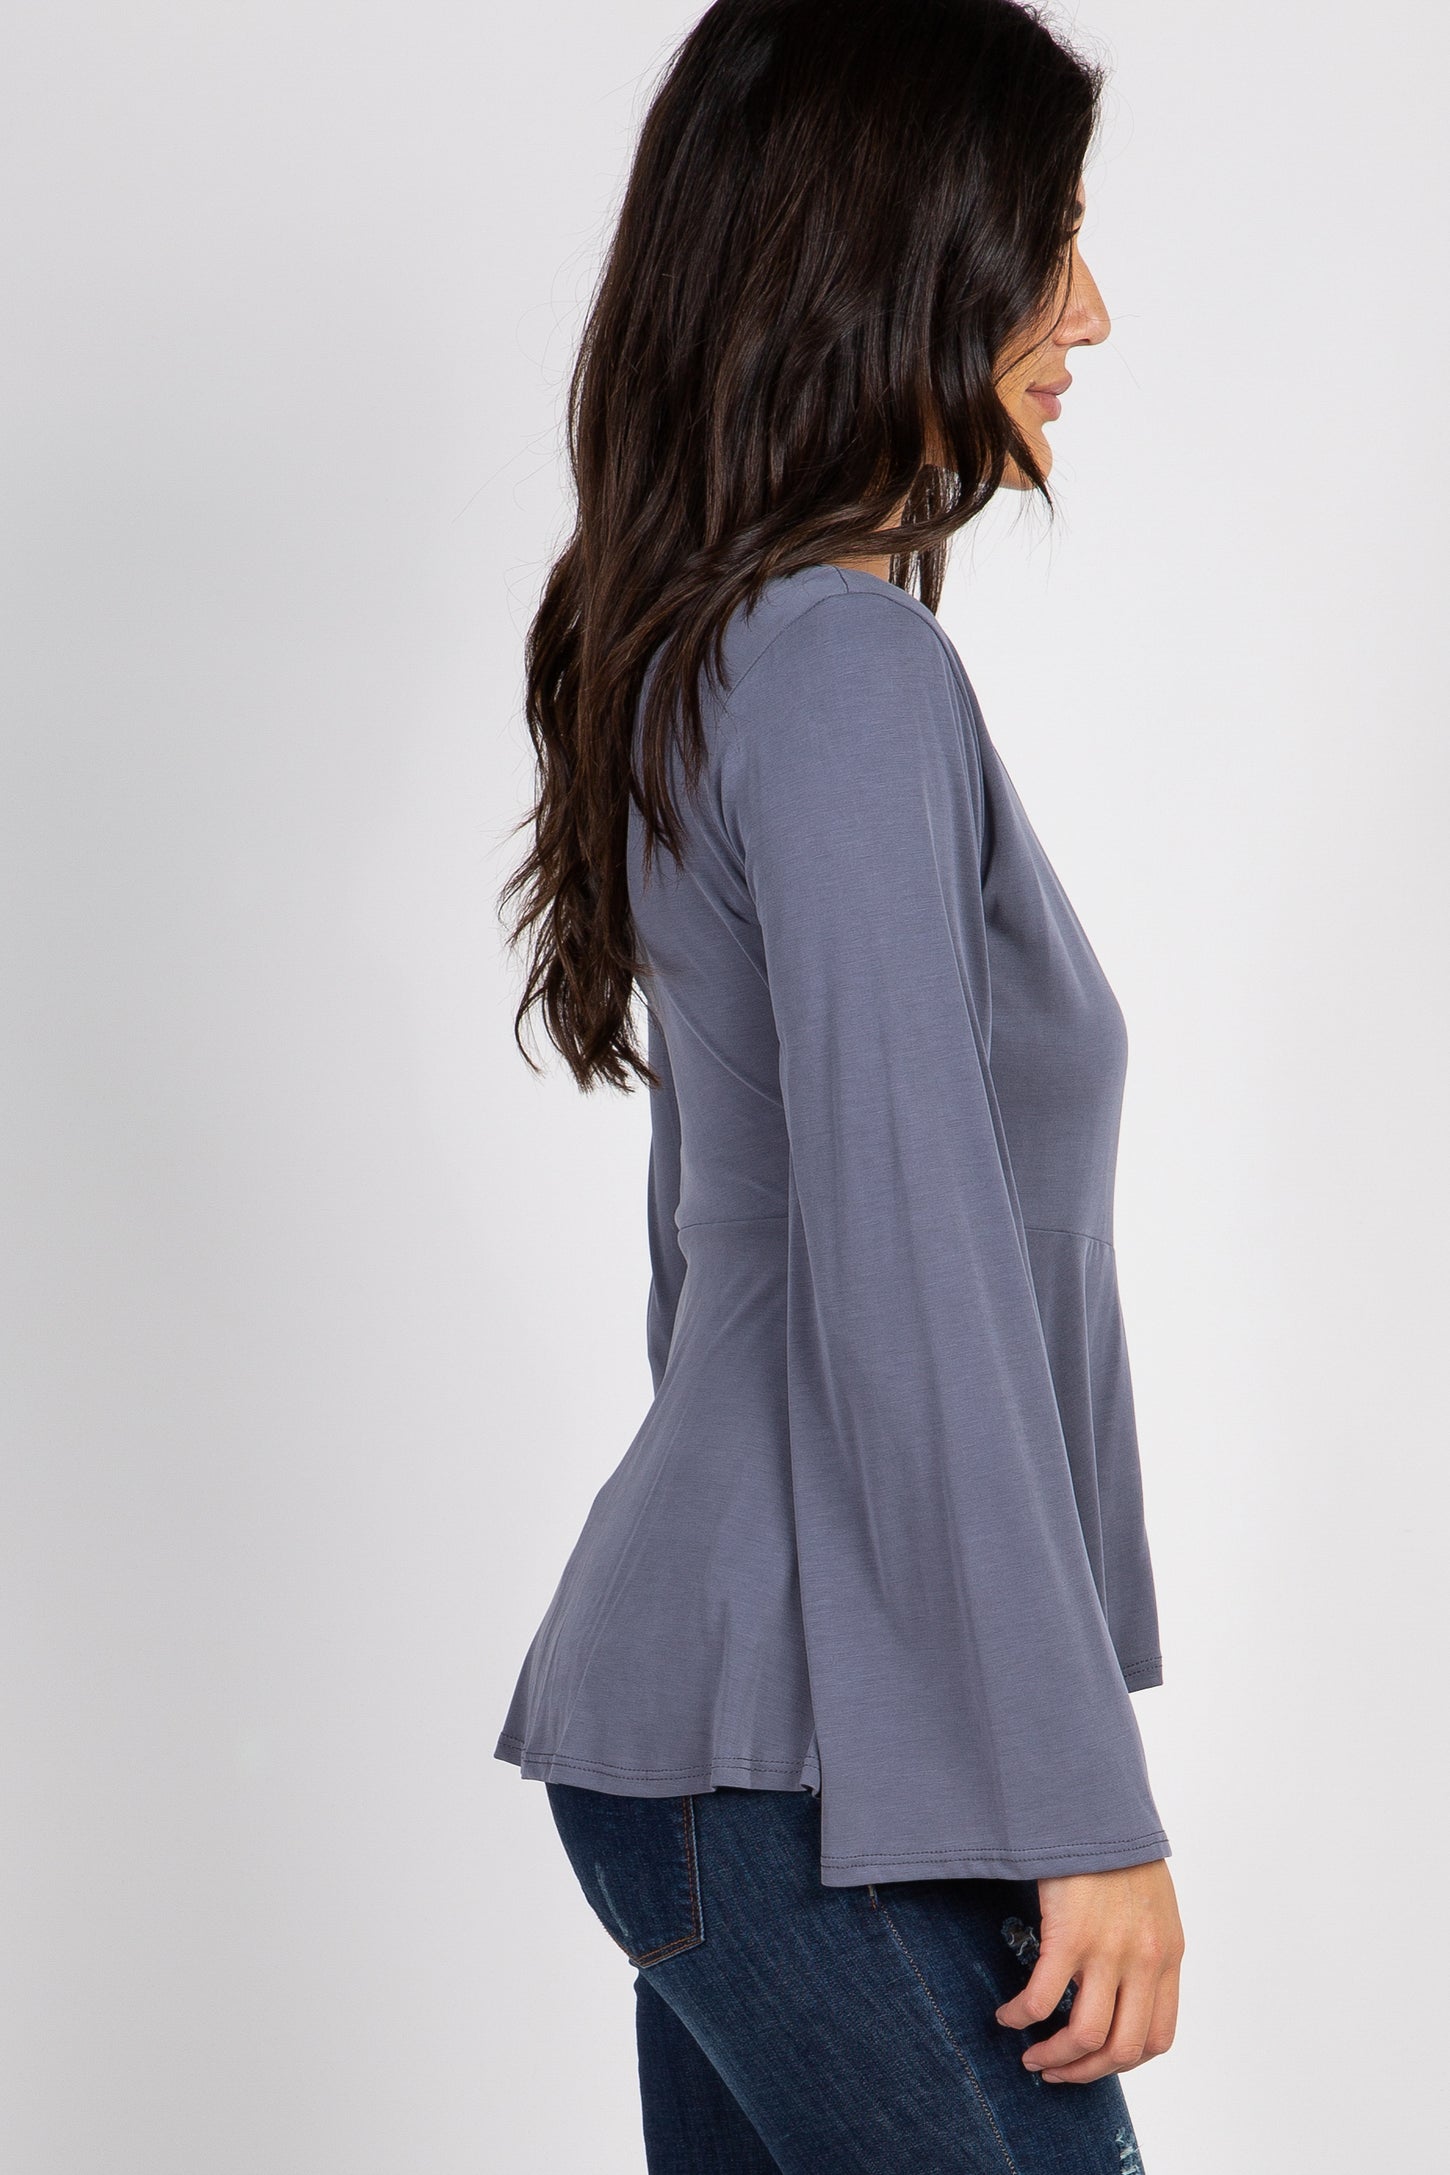 Grey Ruffle Accent Bell Sleeve Wrap Top